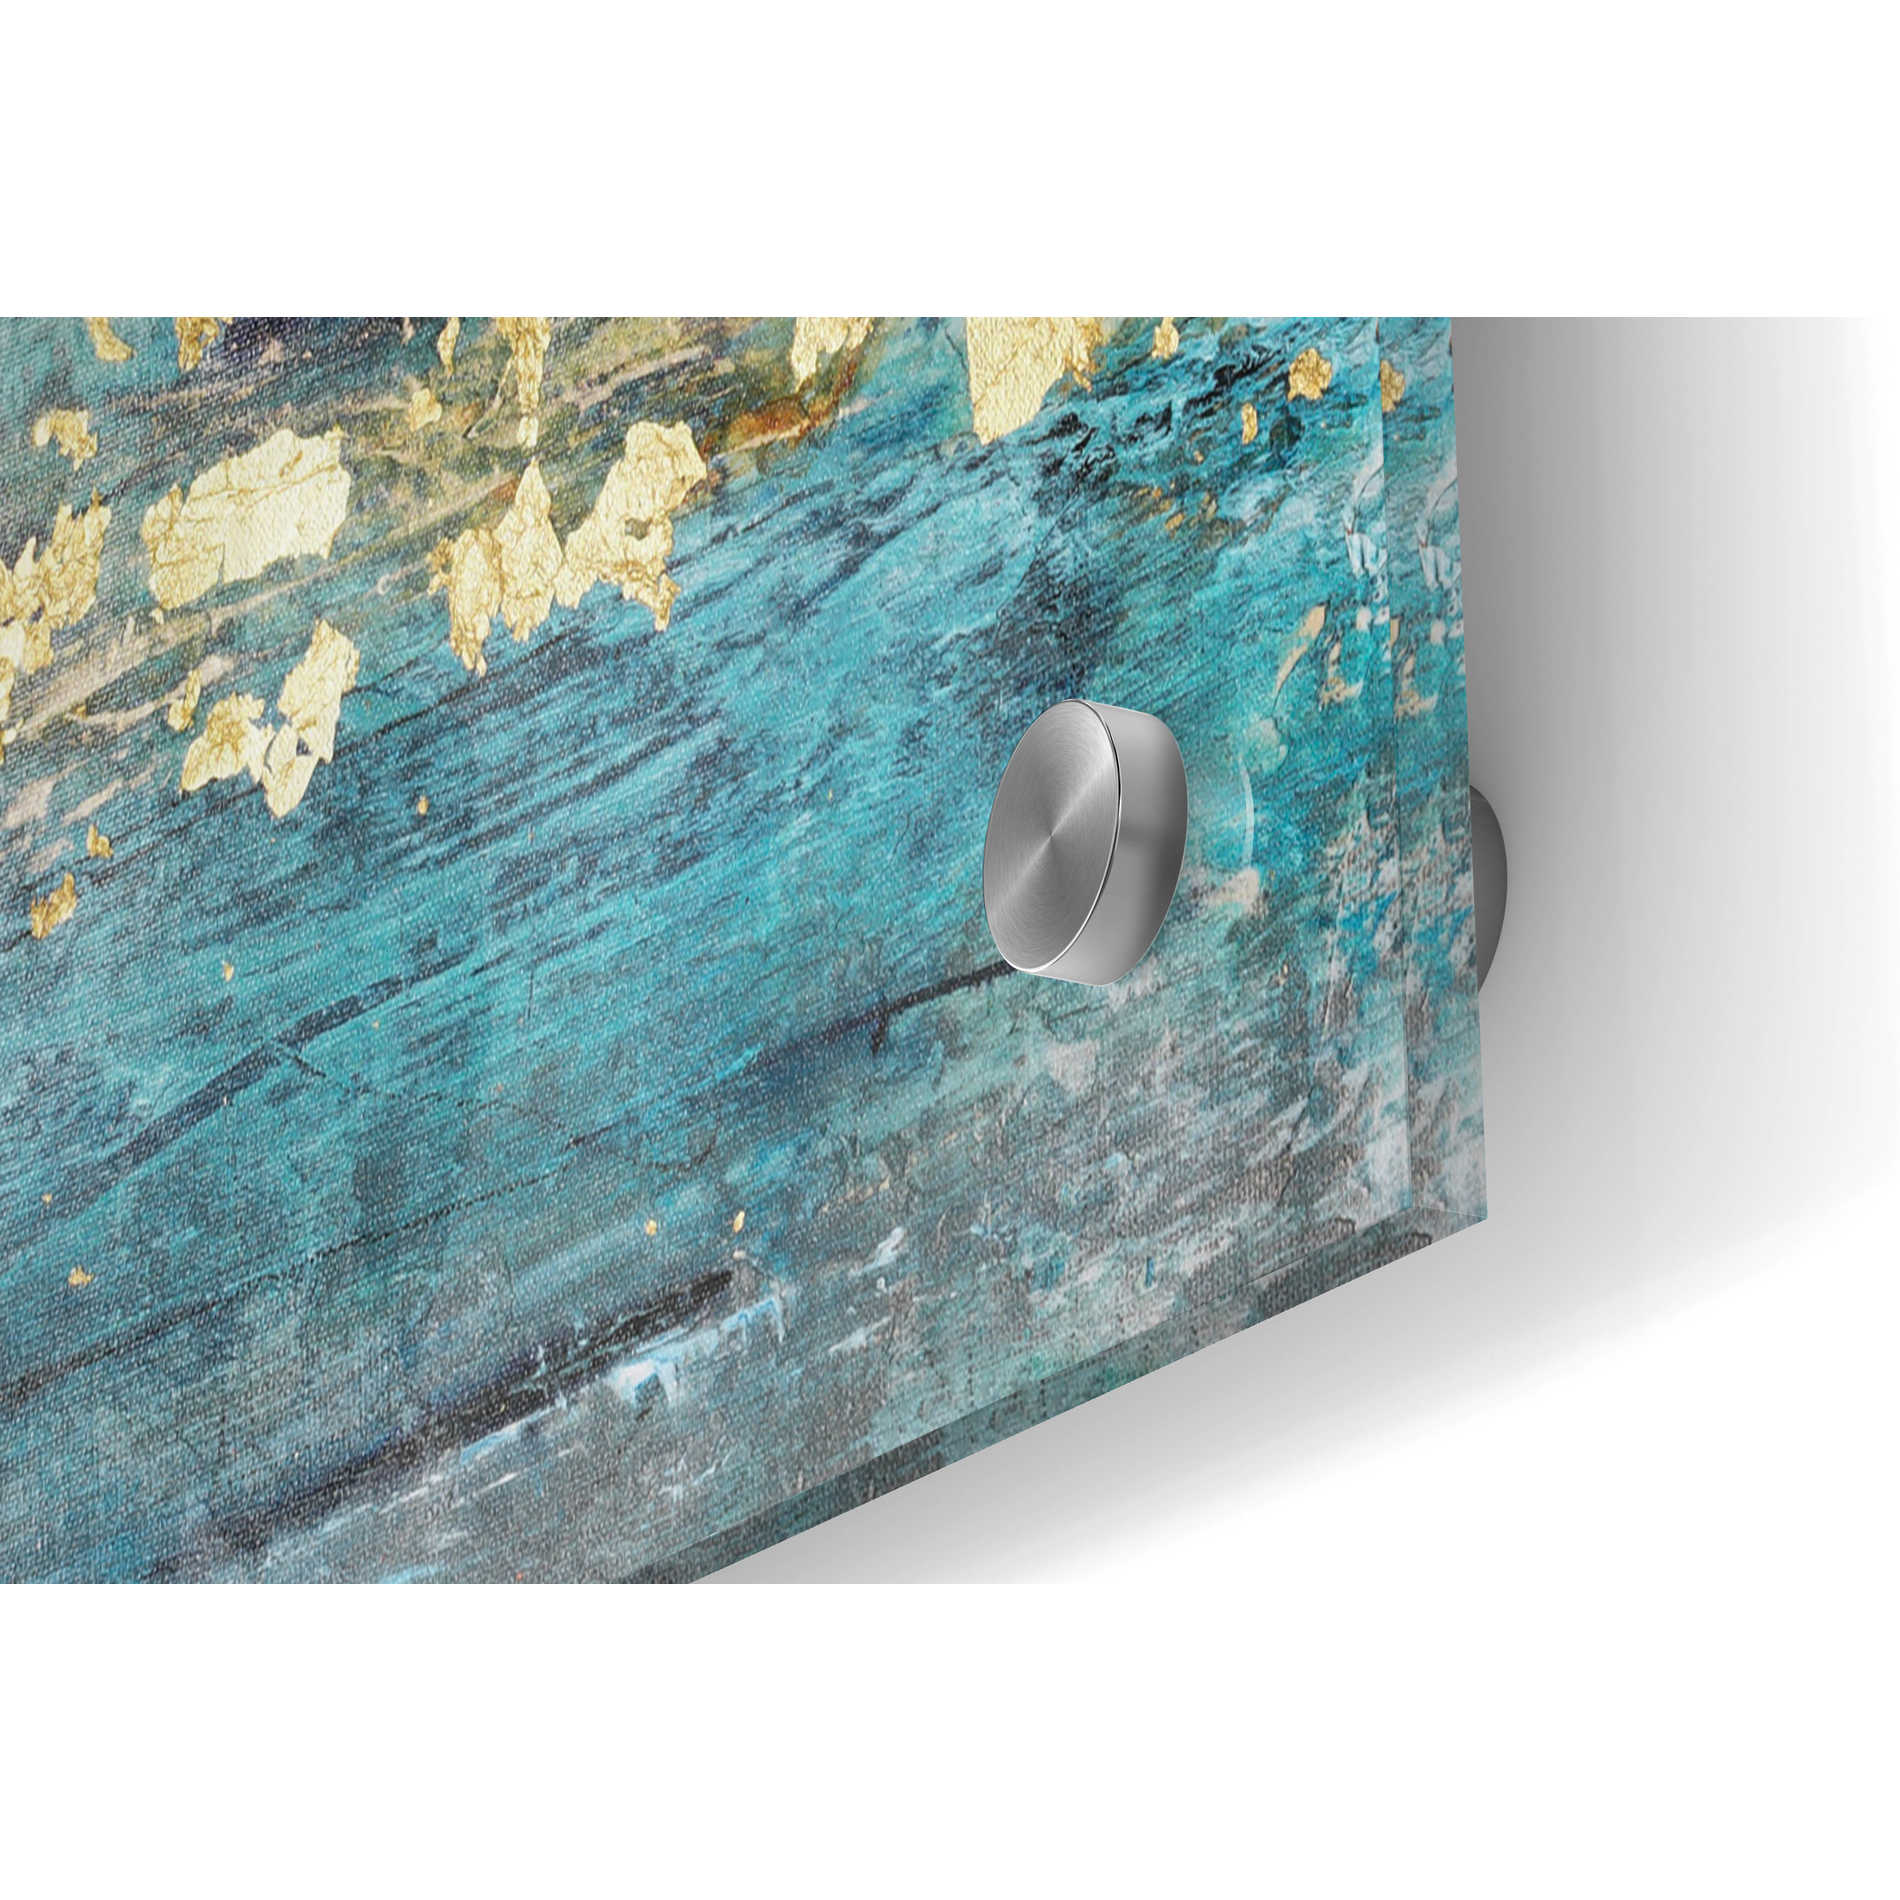 Epic Art 'Accent II' by Tim O'Toole, Acrylic Glass Wall Art,36x24